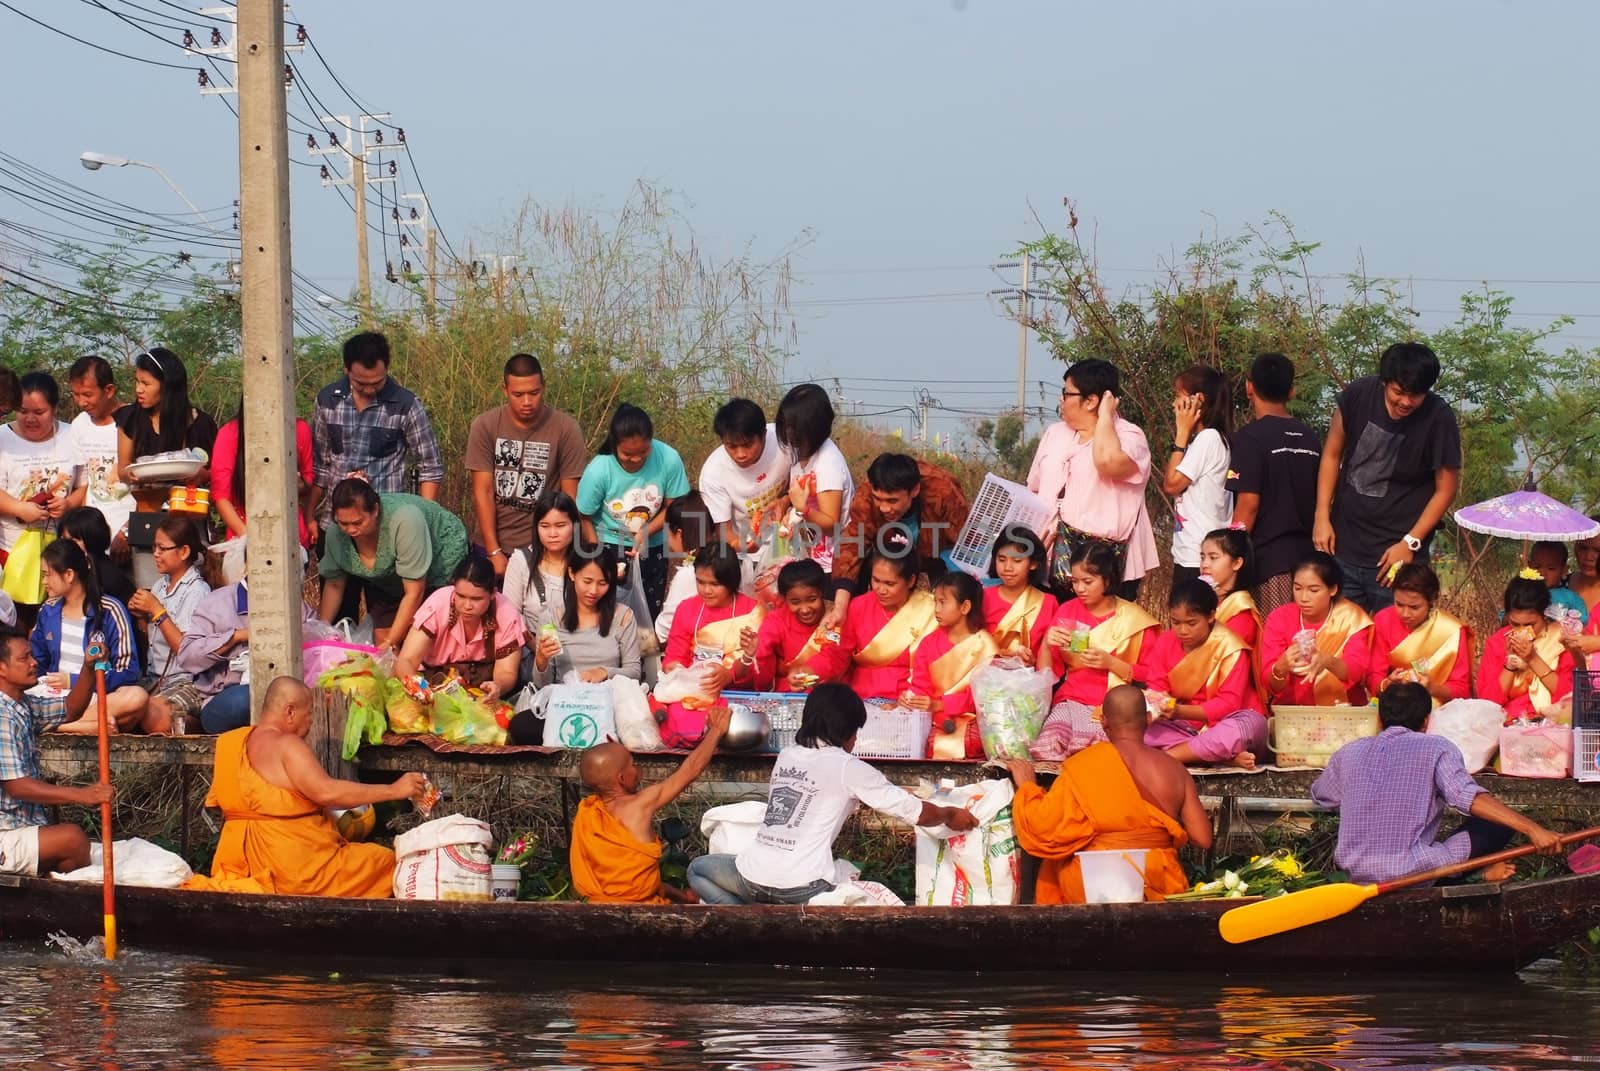 BANGKOK, THAILAND – OCTOBER 8, 2017 : Tuk baat Phra Roi River Festival (Give alms to a Buddhist monk on boat) On the Lamplatiew Canal in front of Wat Sutthaphot, Lat Krabang District Bangkok